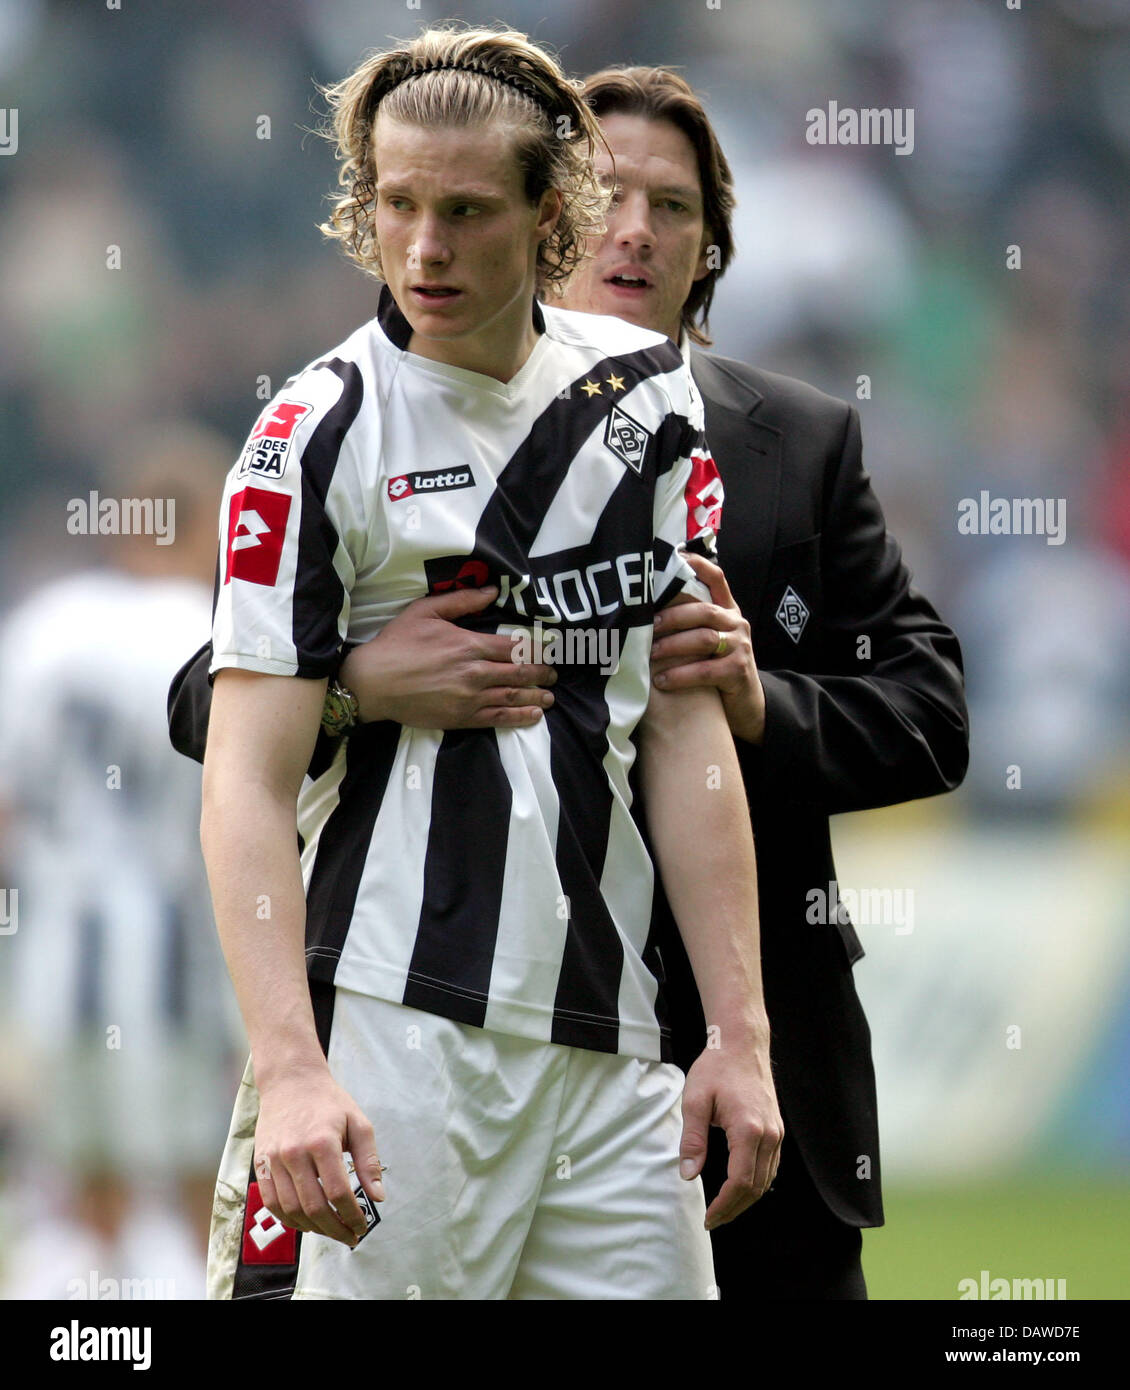 Moenchengladbach's Marcell Jansen (L) is hugged by the club's sporting director Christian Ziege (R) after the Bundesliga match Borussia Moenchengladbach v Eintracht Frankfurt at the Borussia Park of Moenchengladbach, Germany, Saturday, 31 March 2007. The match ended in a 1-1 draw. Photo: Rolf Vennenbernd (ATTENTION: BLOCKING PERIOD! The DFL permits the further utilisation of the pi Stock Photo